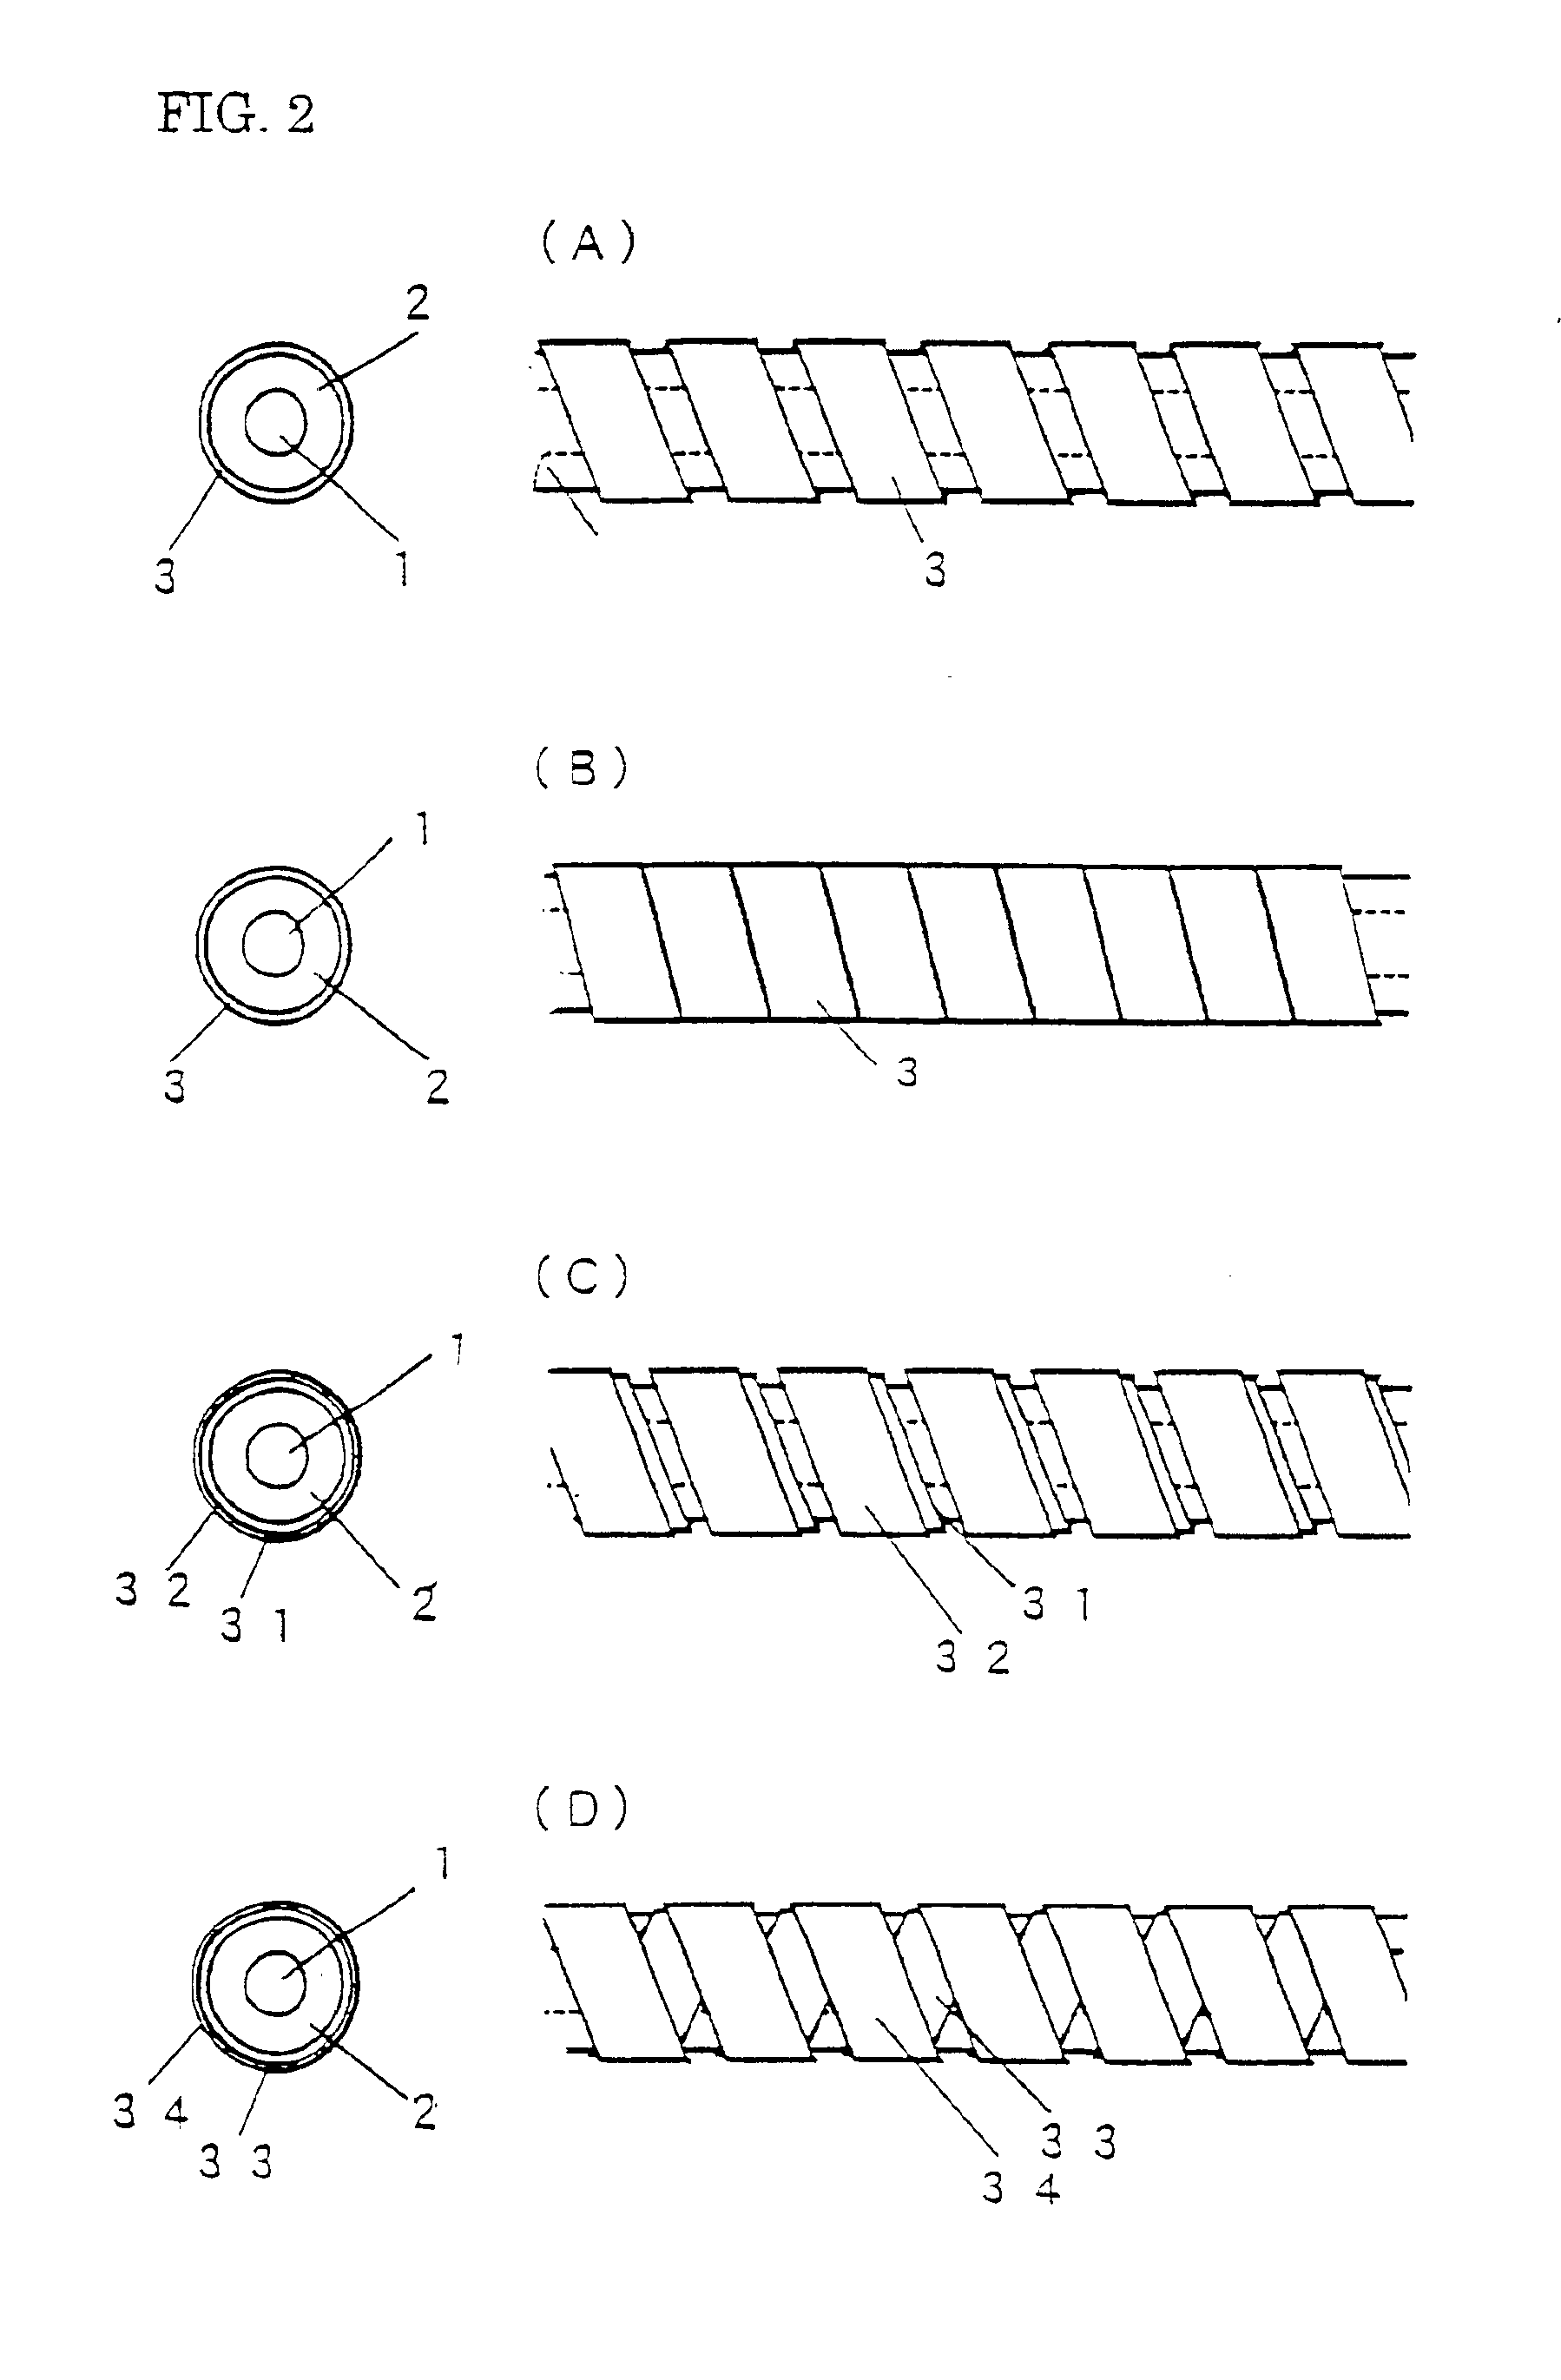 Coaxial cables, multicore cables, and electronic apparatuses using such cables